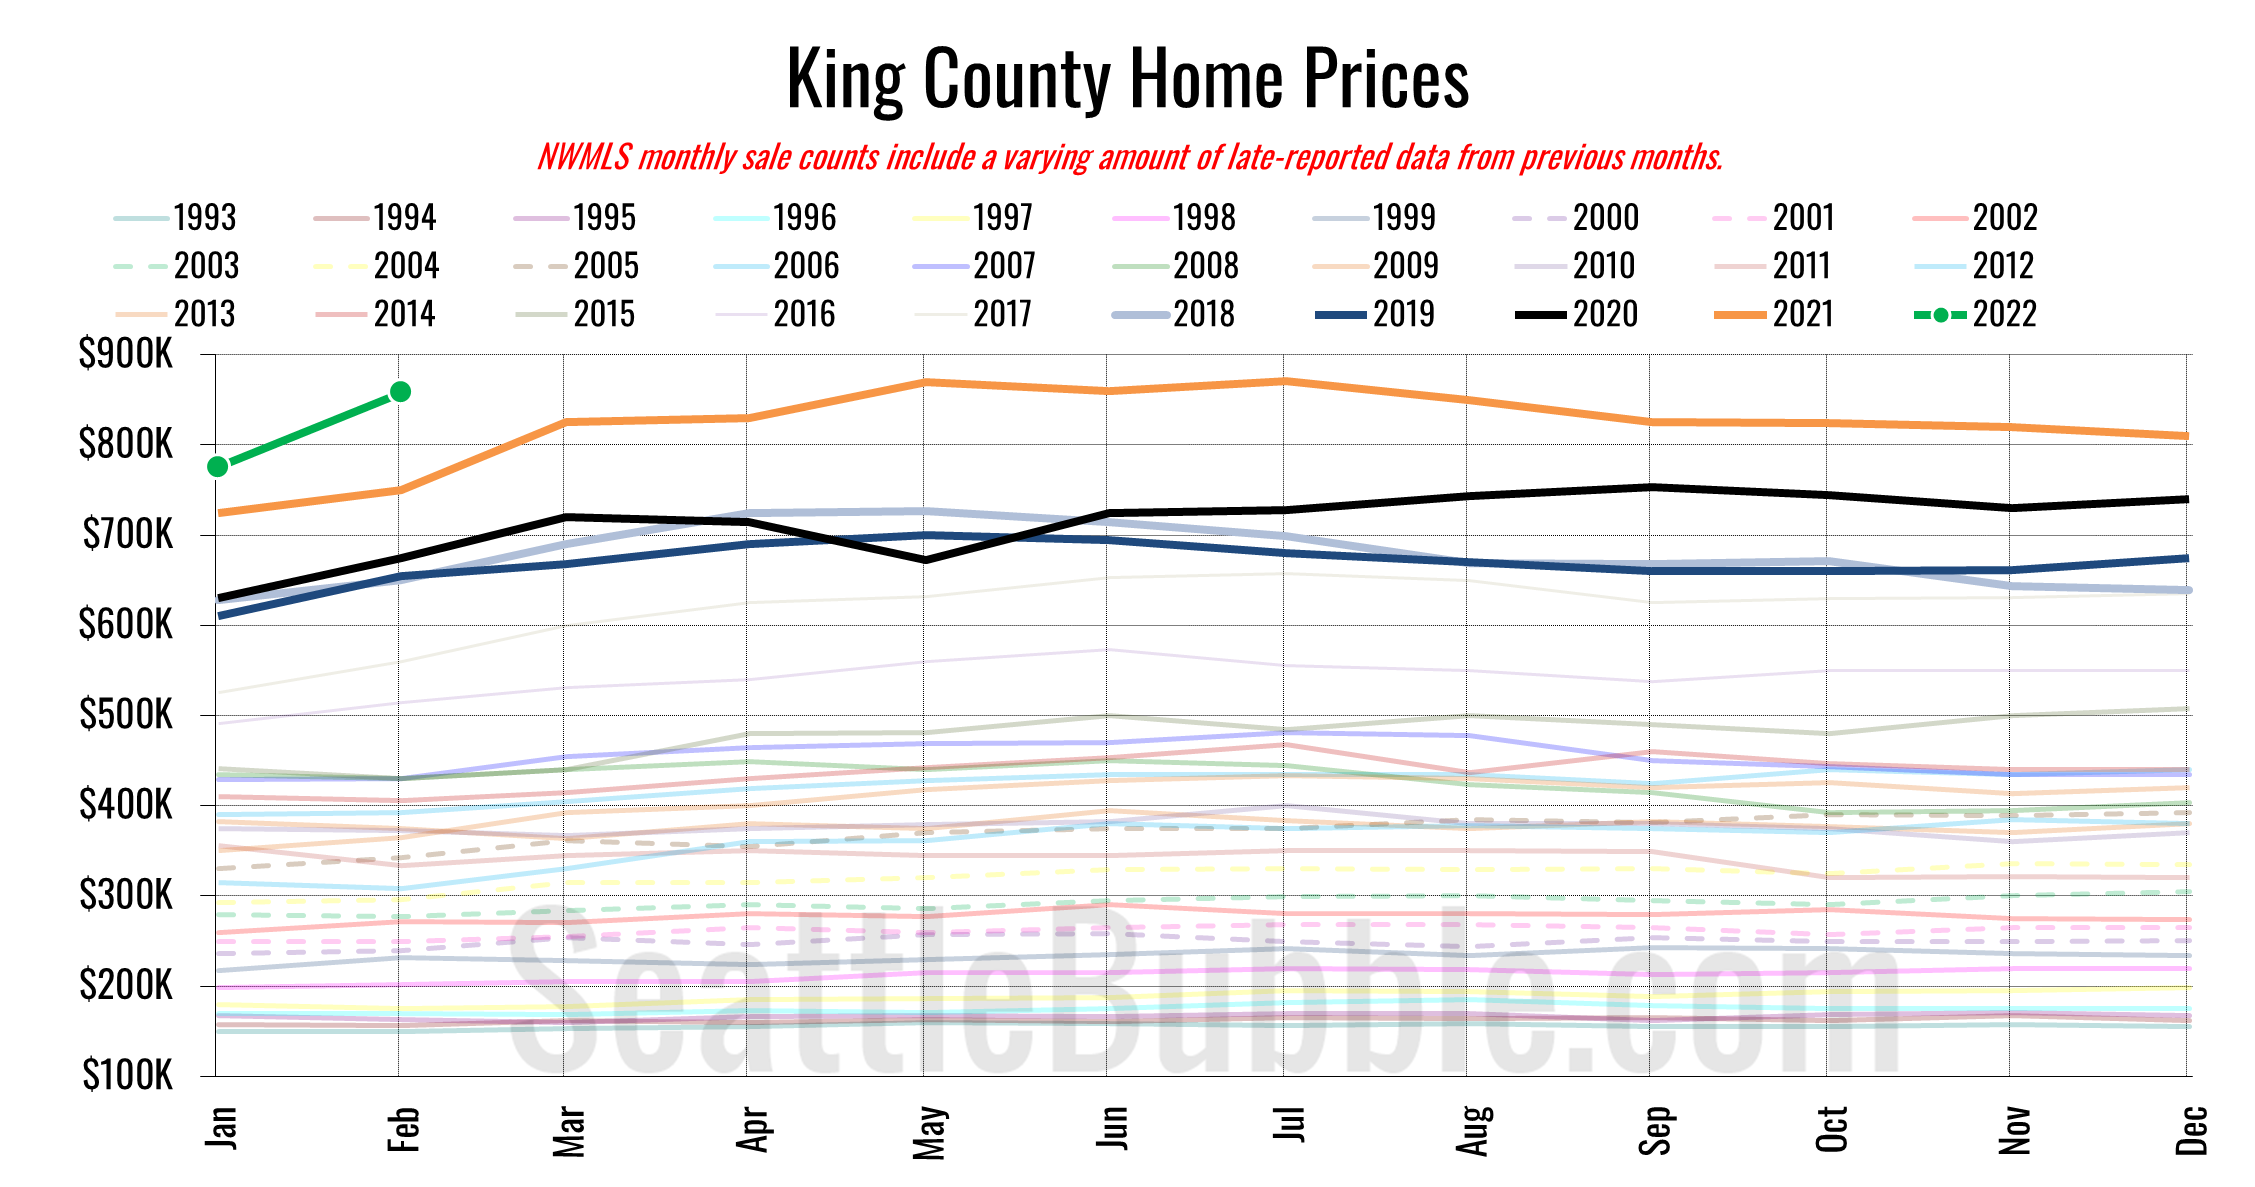 King County Home Prices